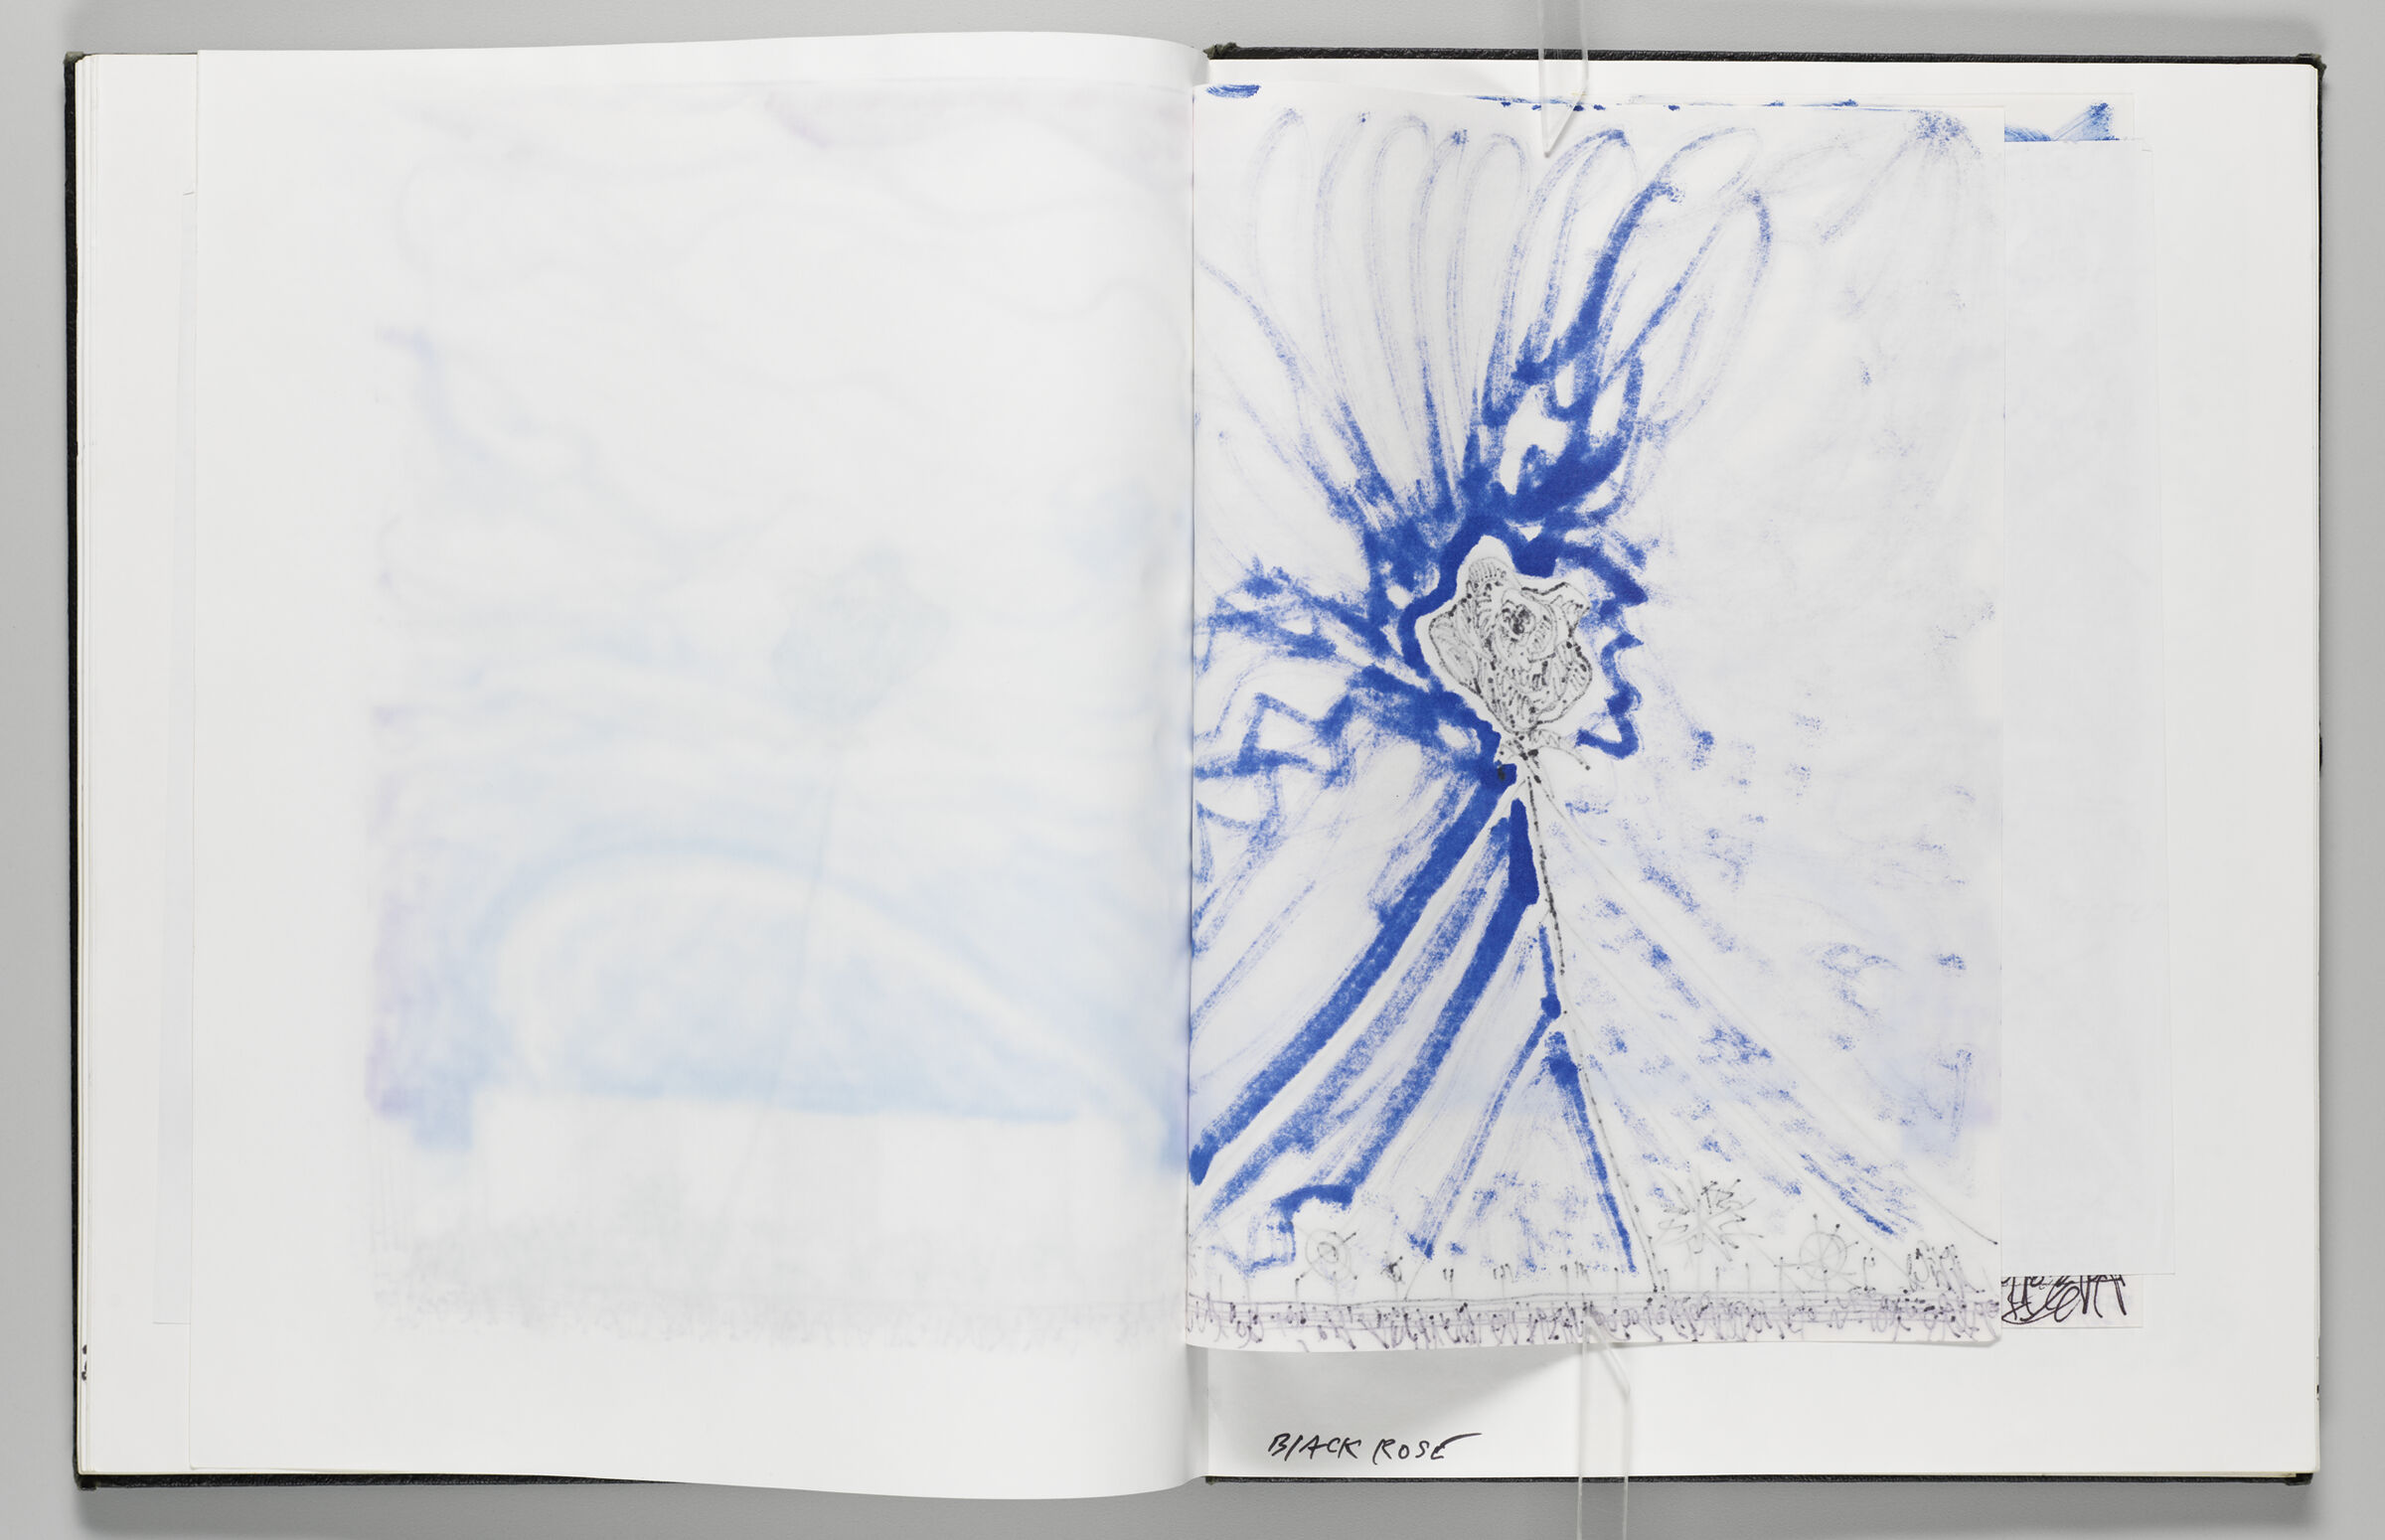 Untitled (Pasted-In Sky Art Sketch, Left Page); Untitled (Pasted-In Sky Art Sketch, Right Page)